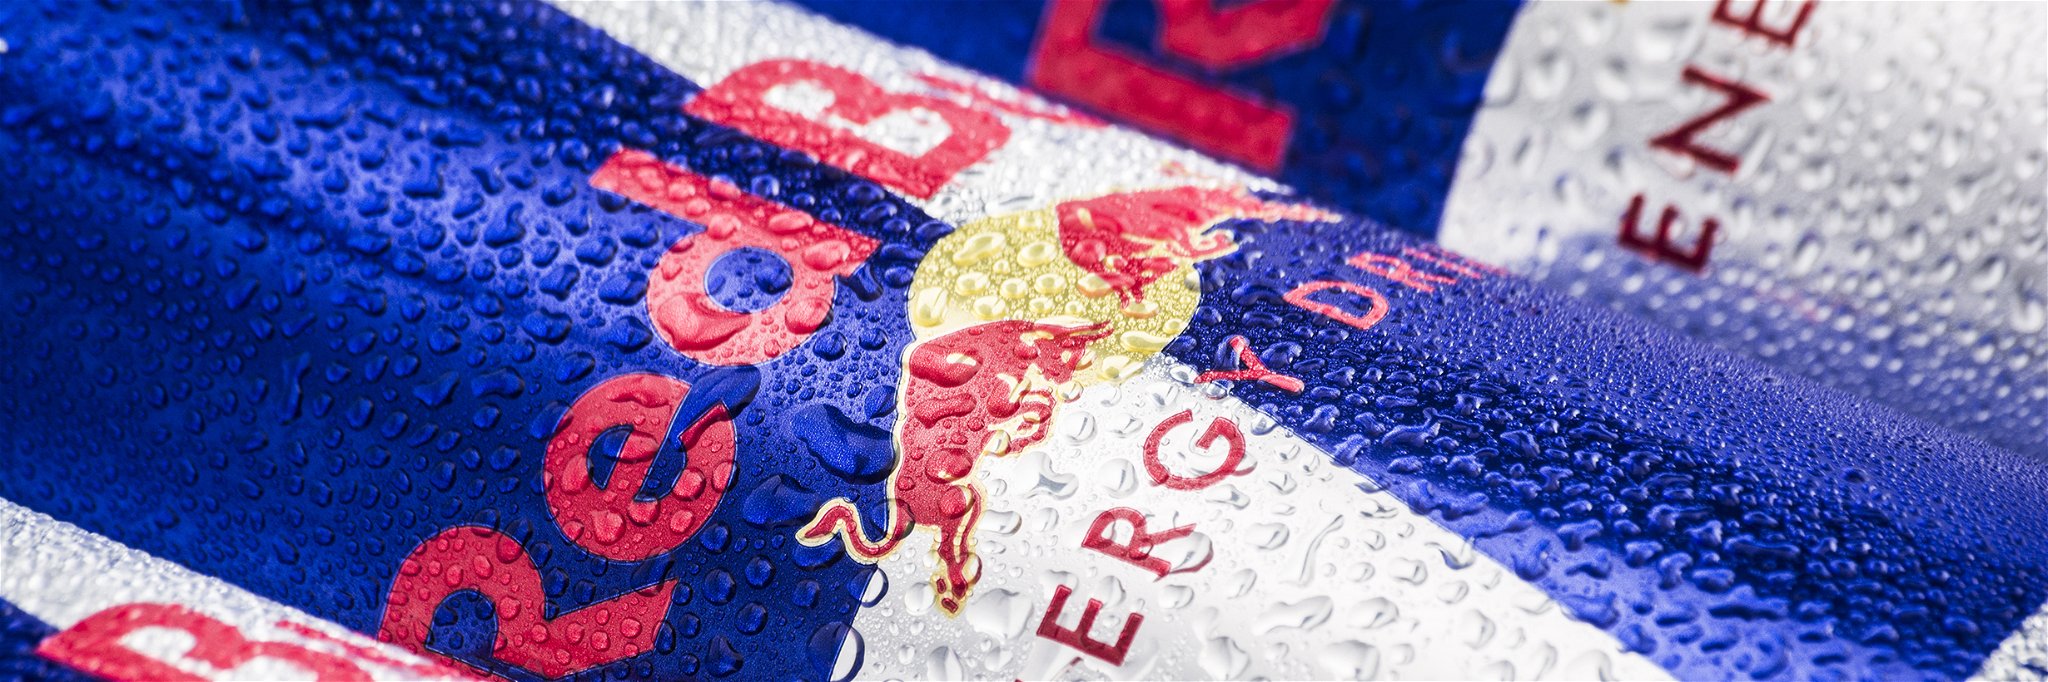 Red Bull has asked a small winery to remove or change its logo.